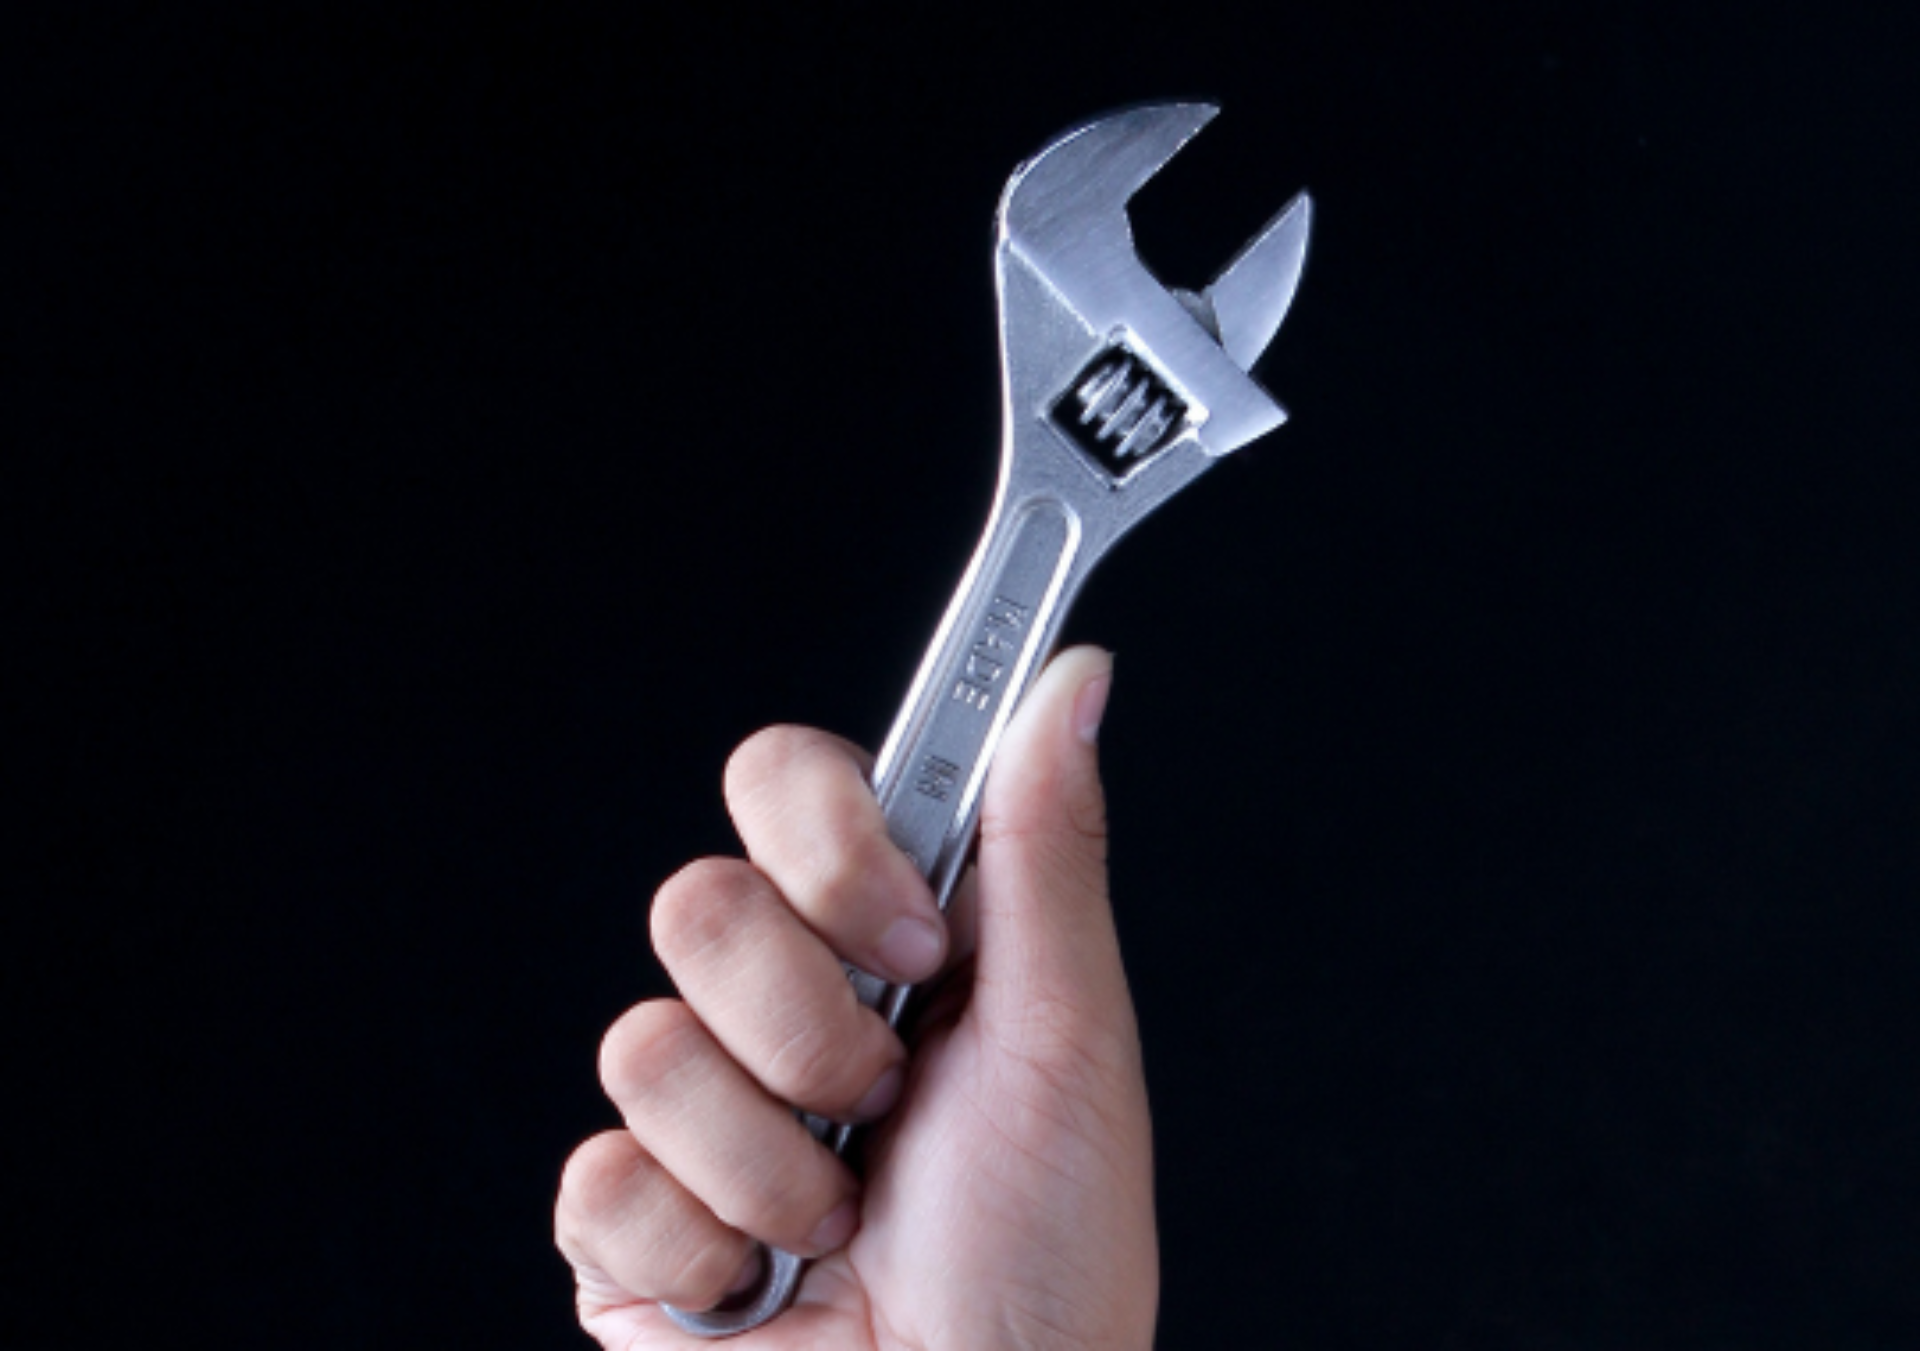 Image of hand holding a wrench for property repairs against a black background